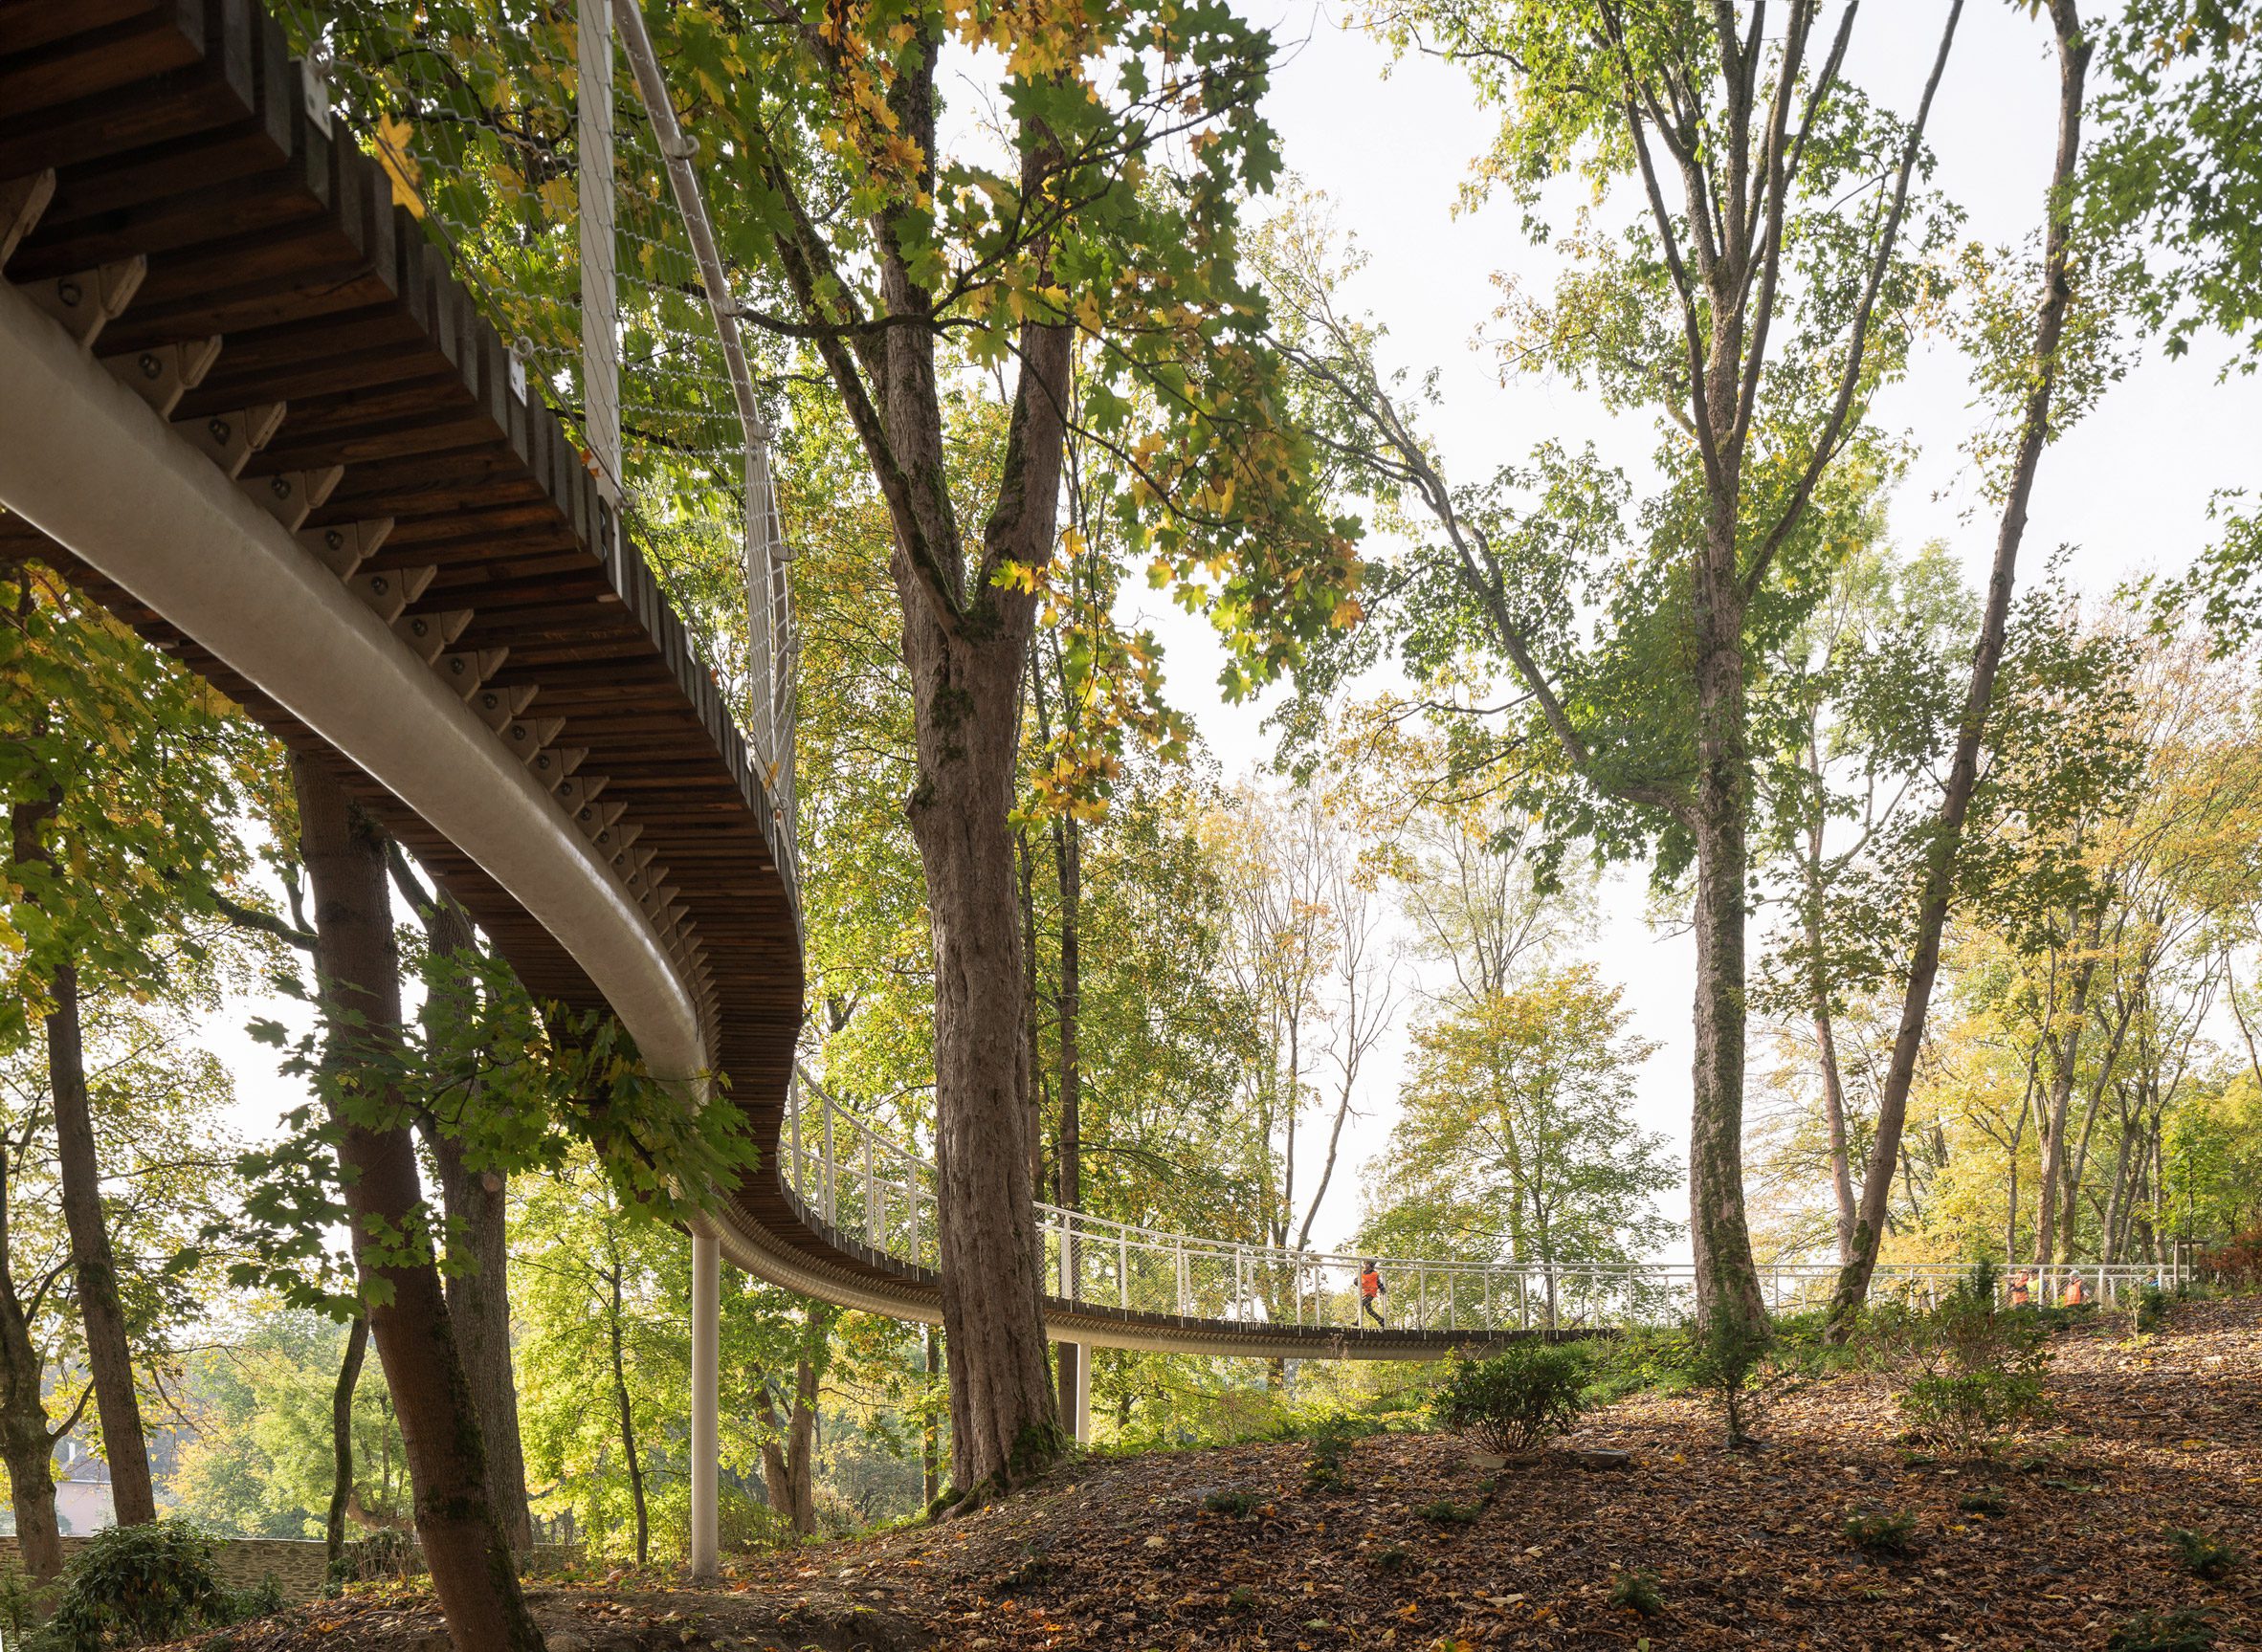 Elevated walkway in The Park of Memories by SOA Architekti